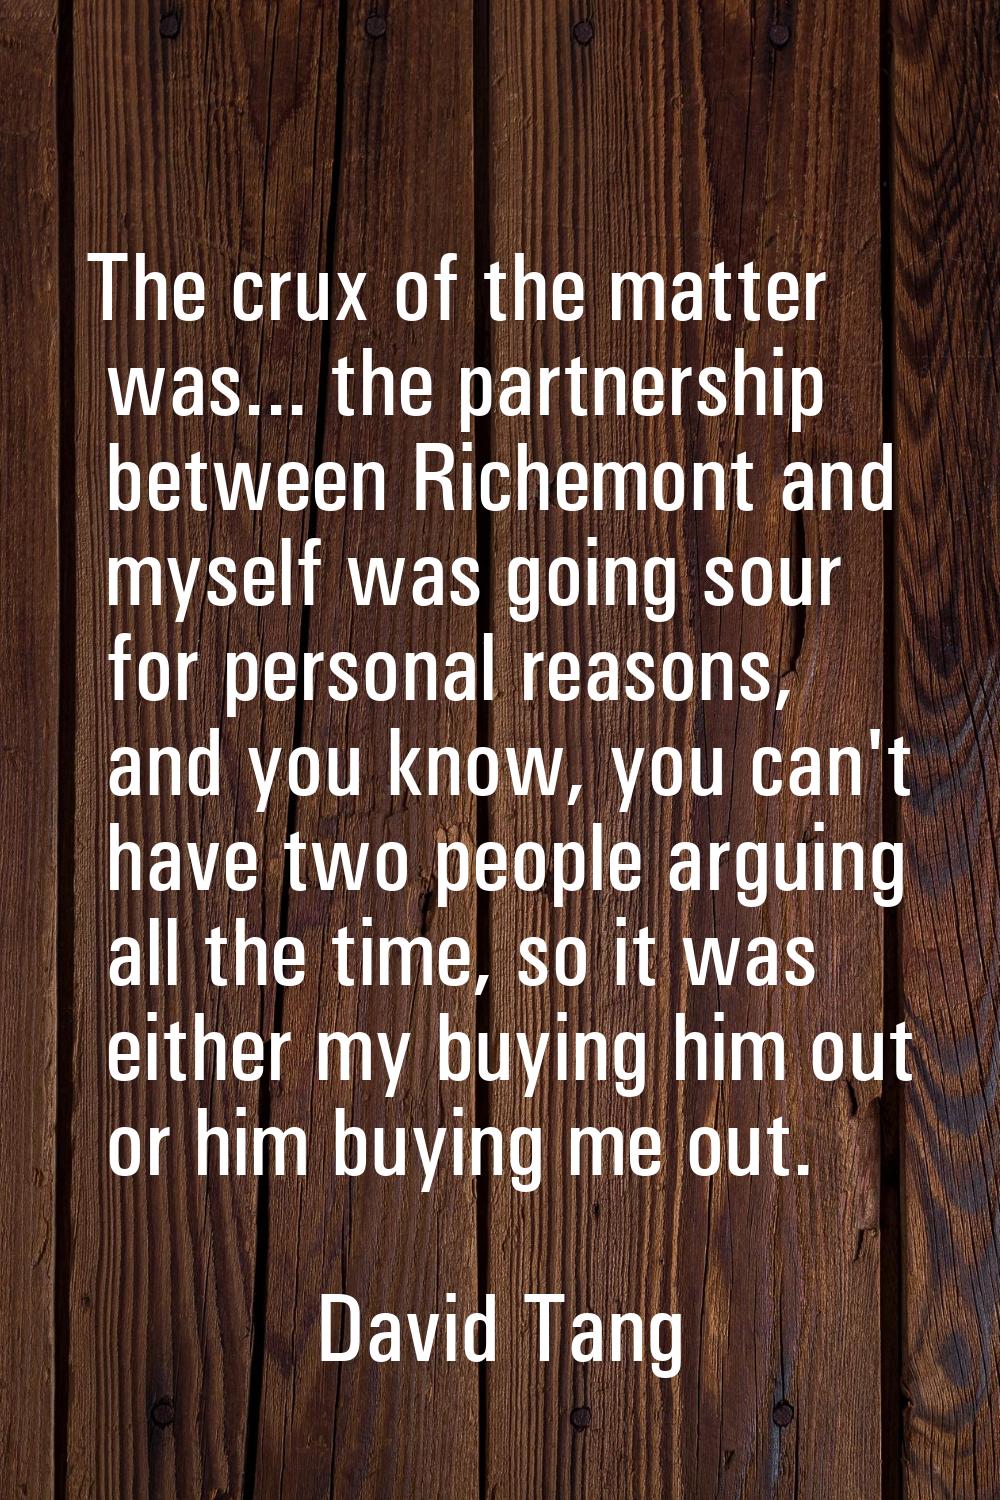 The crux of the matter was... the partnership between Richemont and myself was going sour for perso